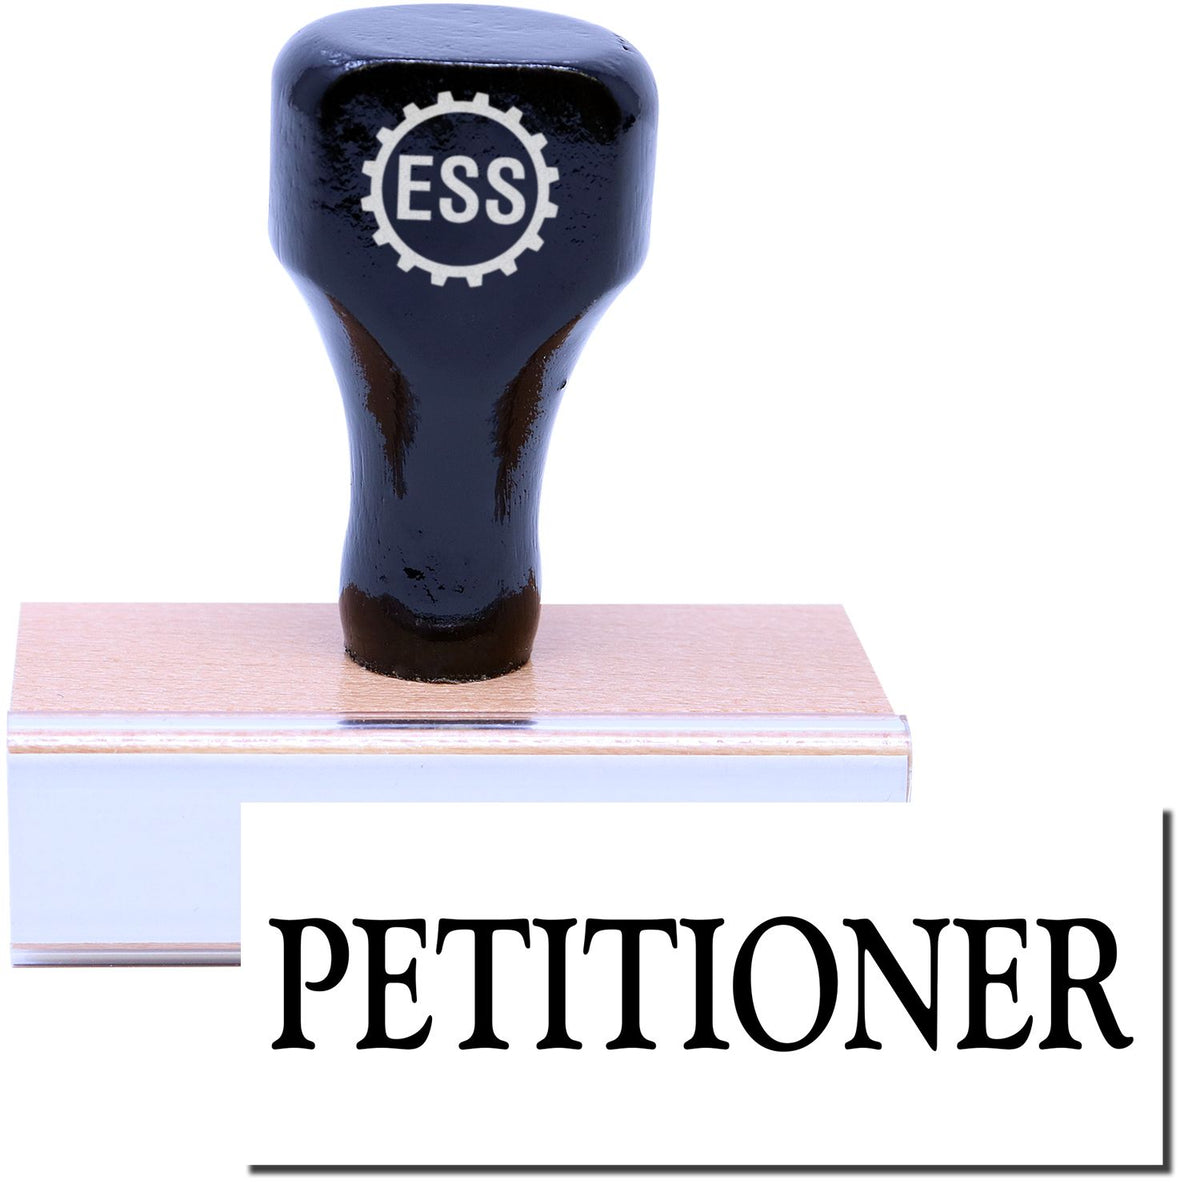 A stock office rubber stamp with a stamped image showing how the text &quot;PETITIONER&quot; in a large font is displayed after stamping.